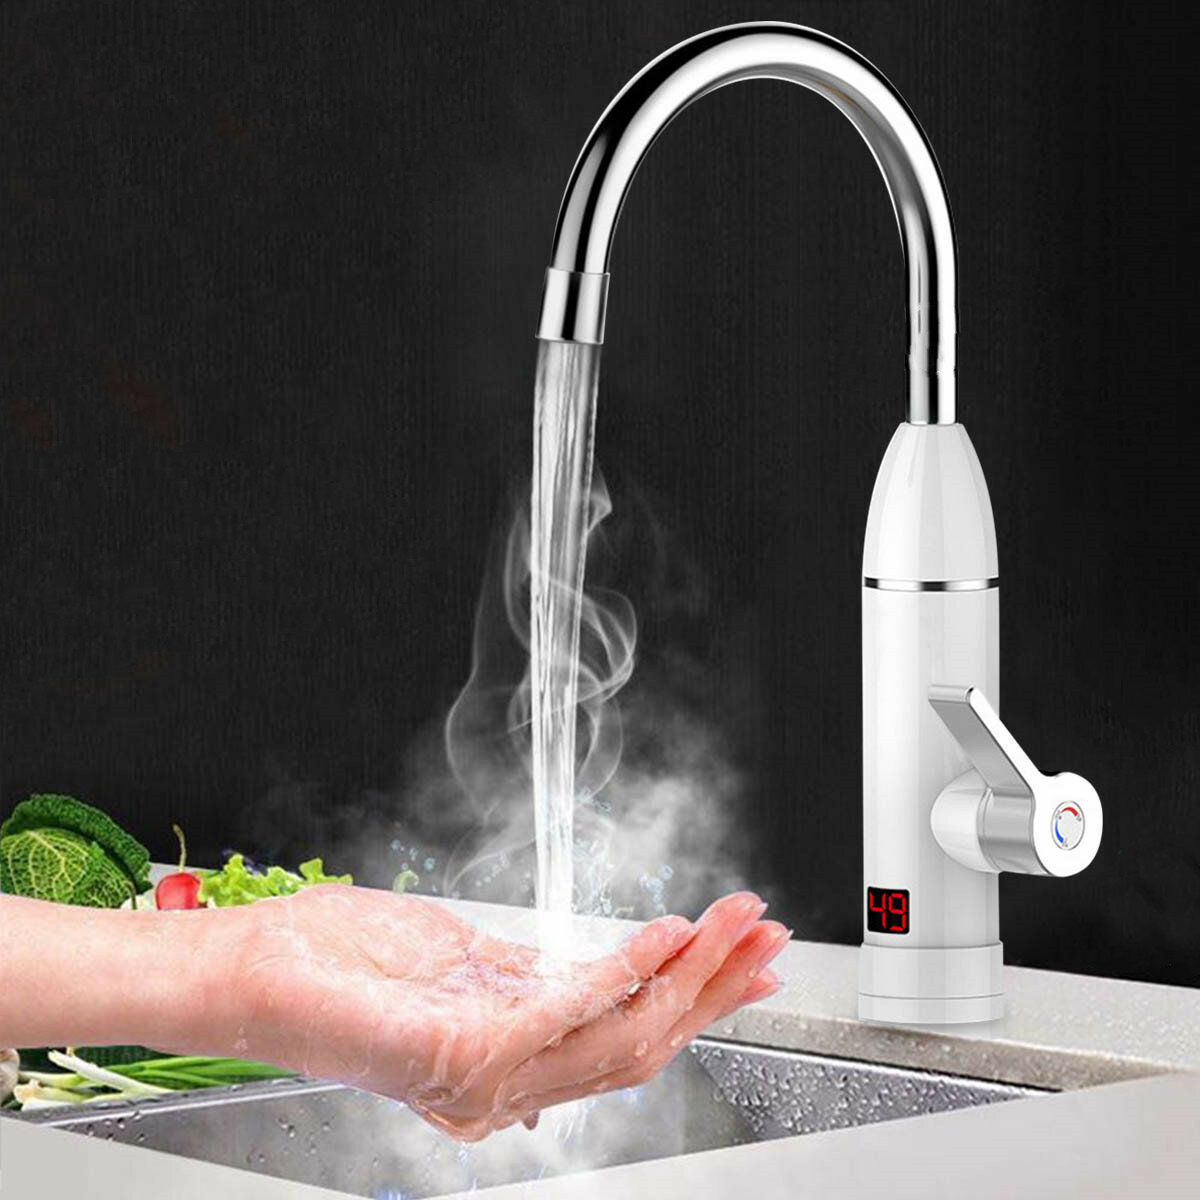 

3KW 220V Electric Tankless Faucet Hot Water Instant Heater Bathroom Kitchen Home Tap LED Display